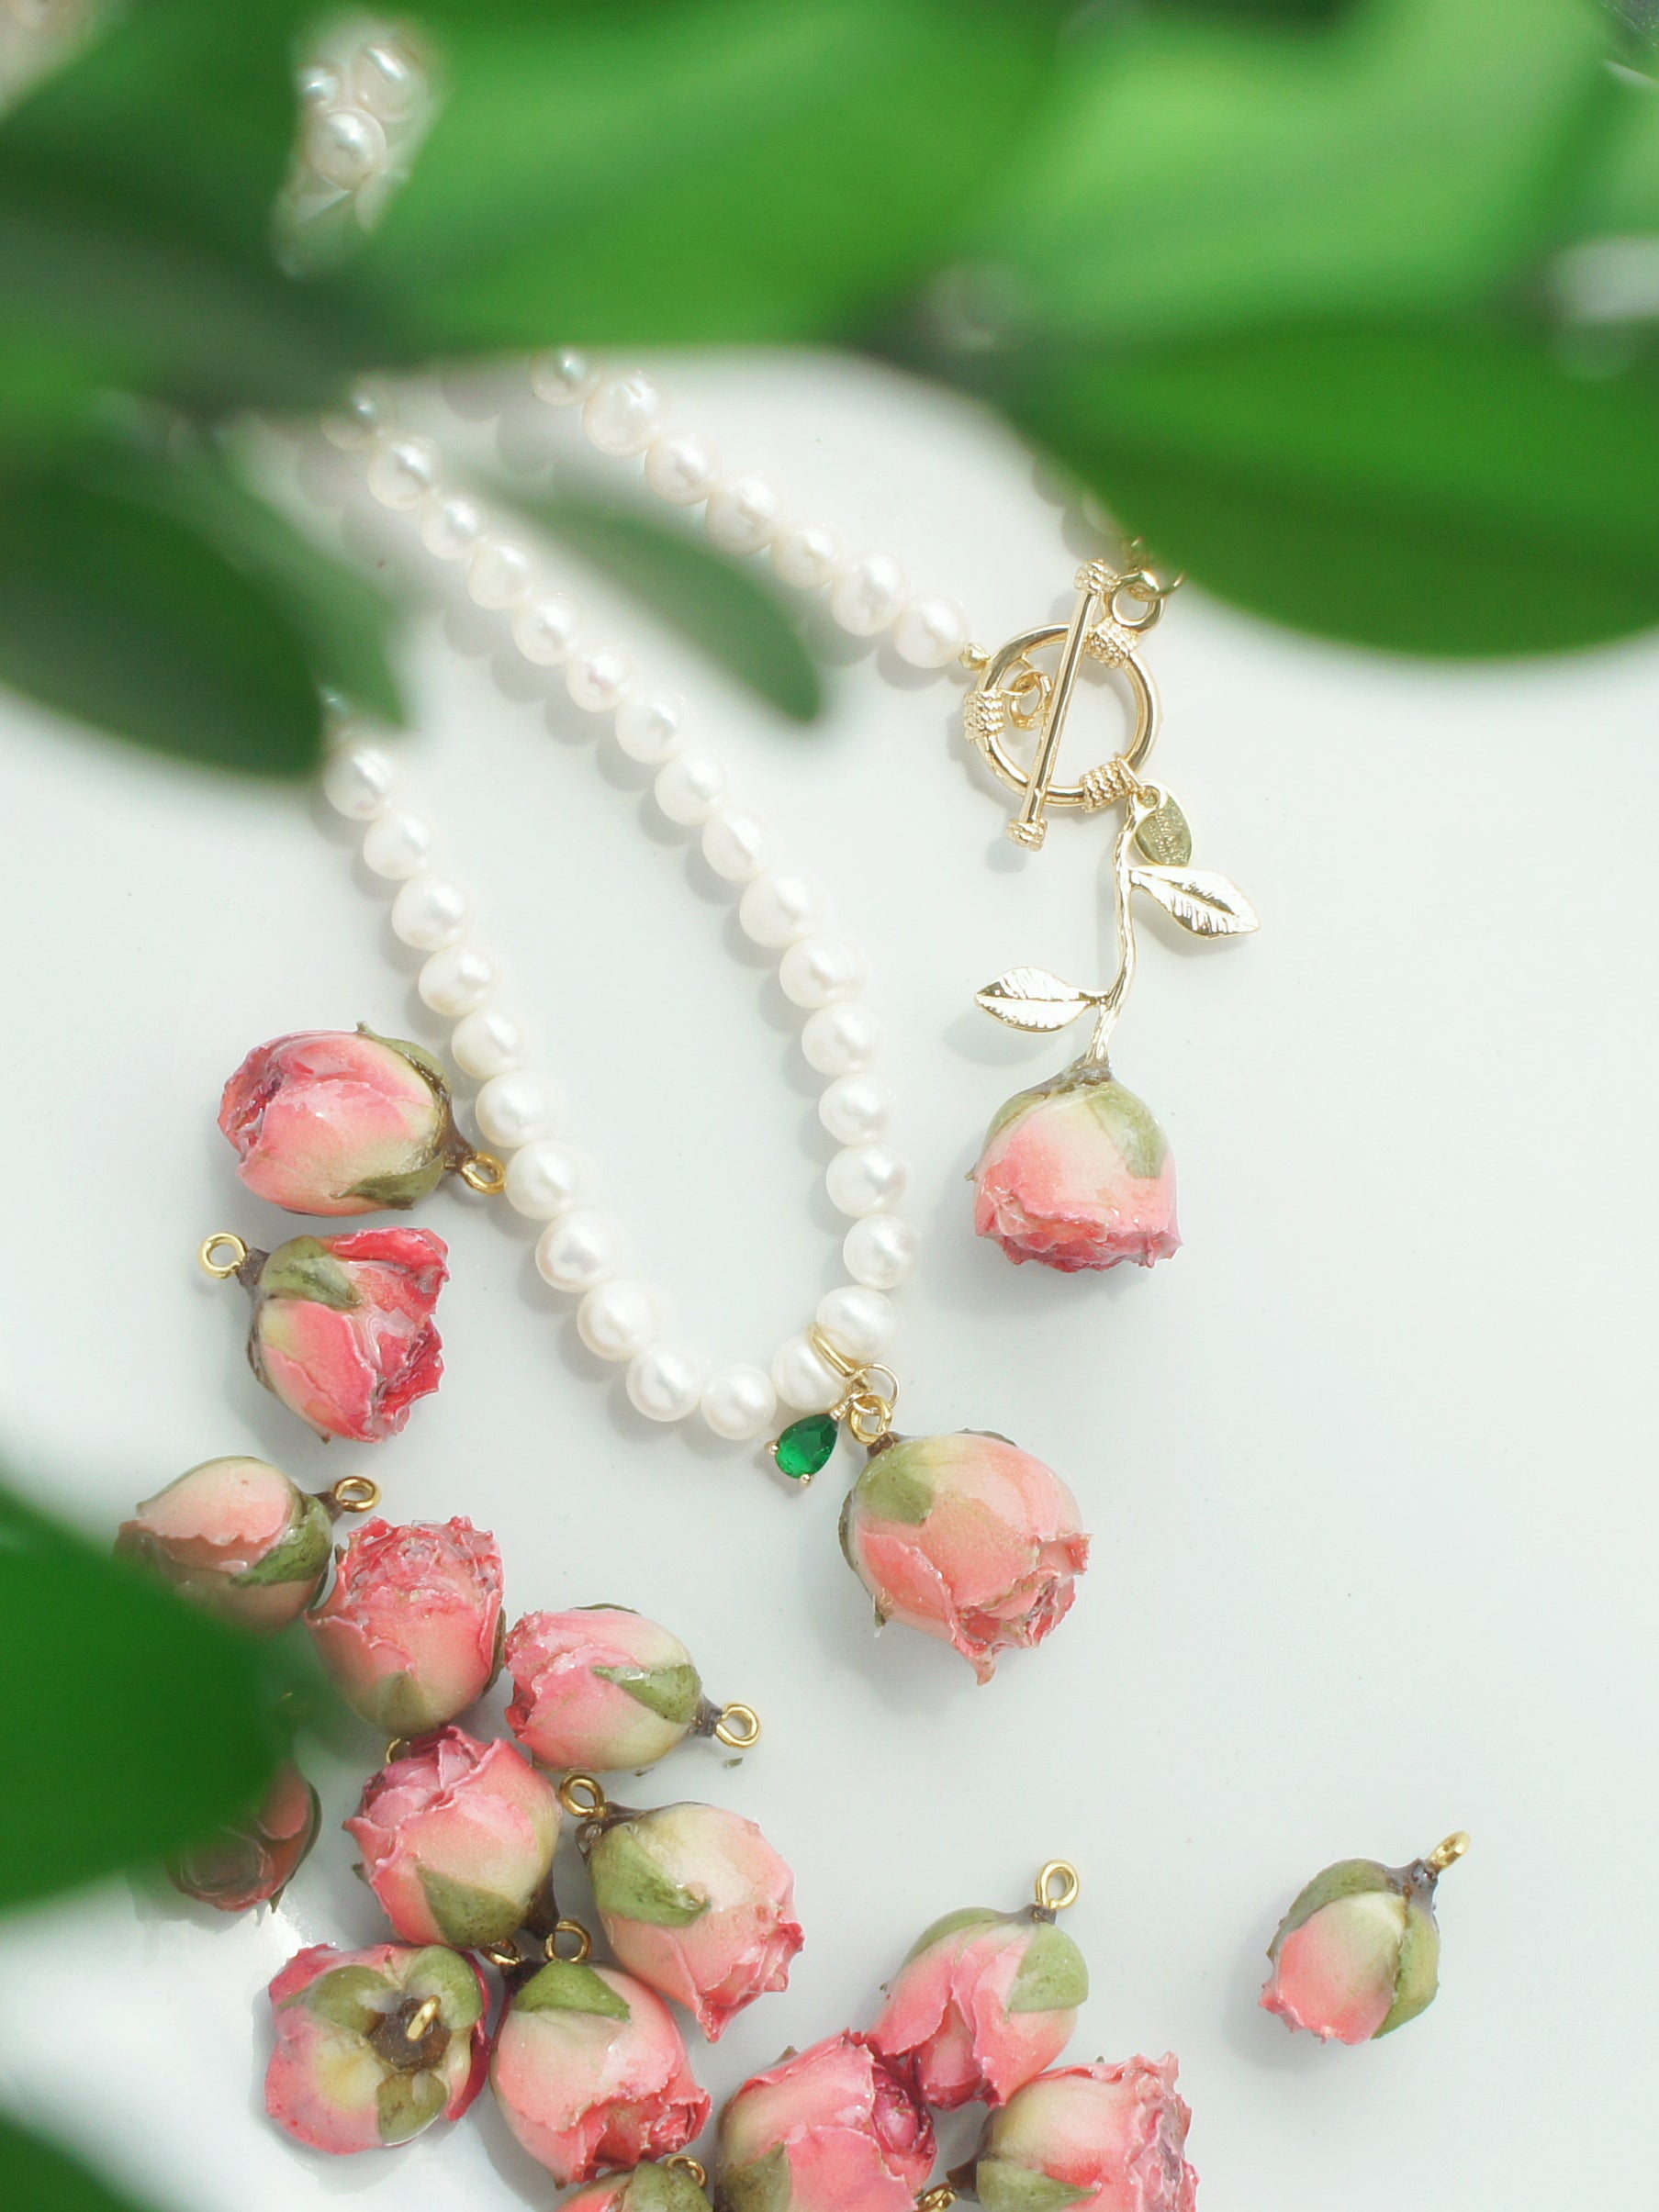 *REAL FLOWER* Bella Rosa Rosebud and Freshwater Pearl Necklace with Green Crystal